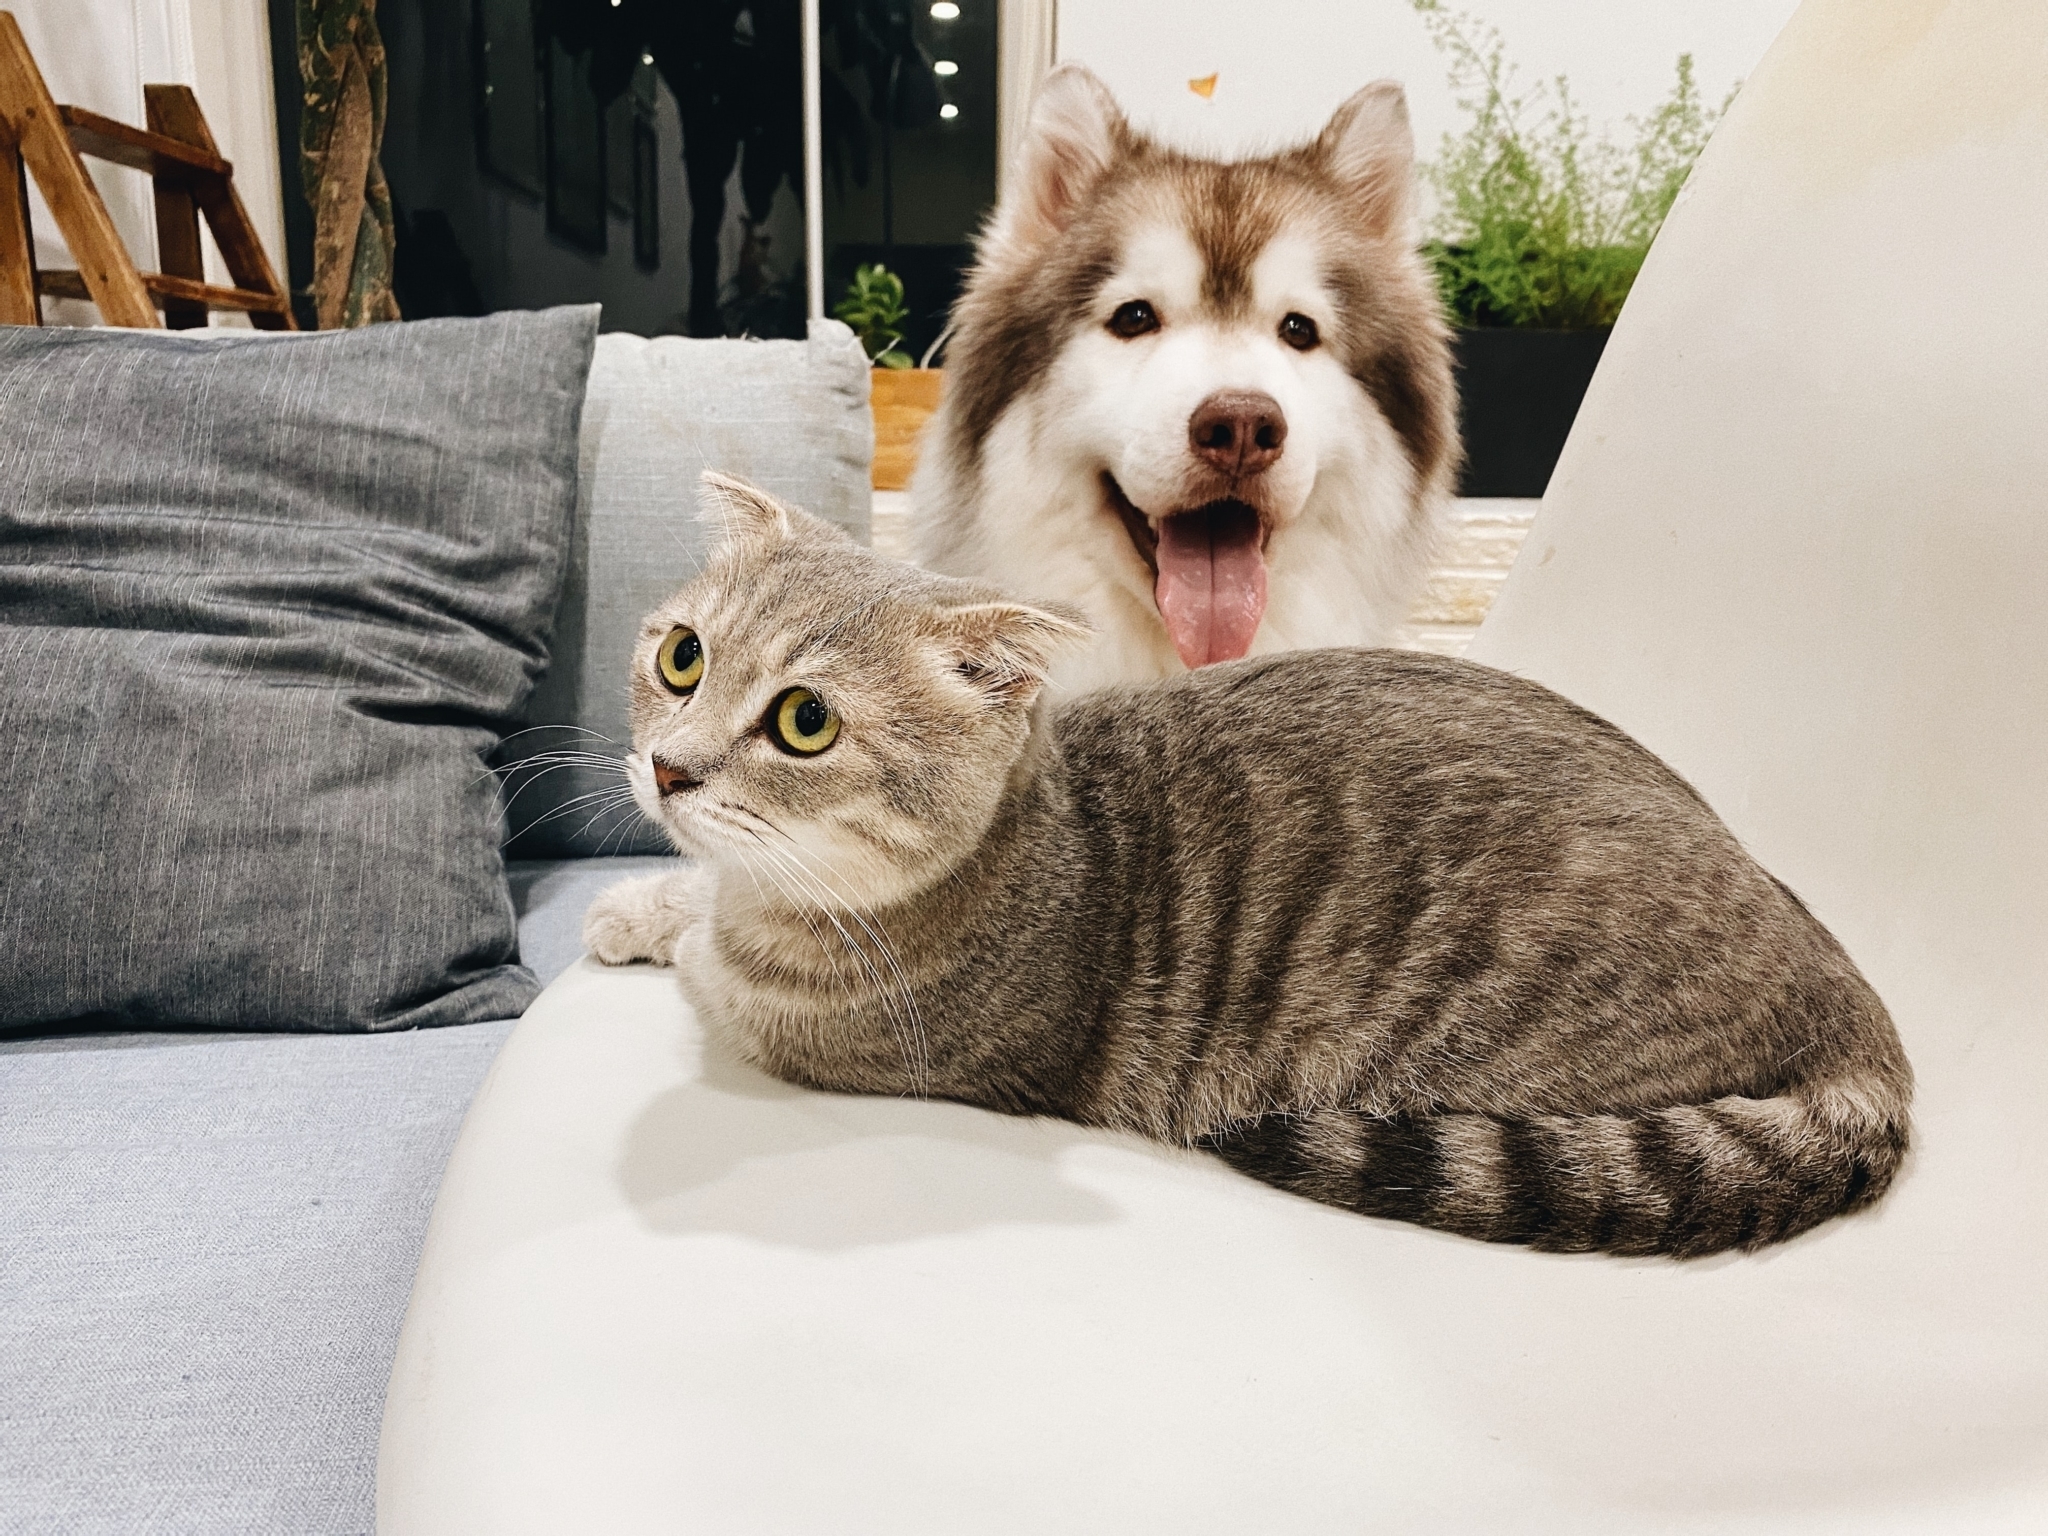 Introduce dog and cat